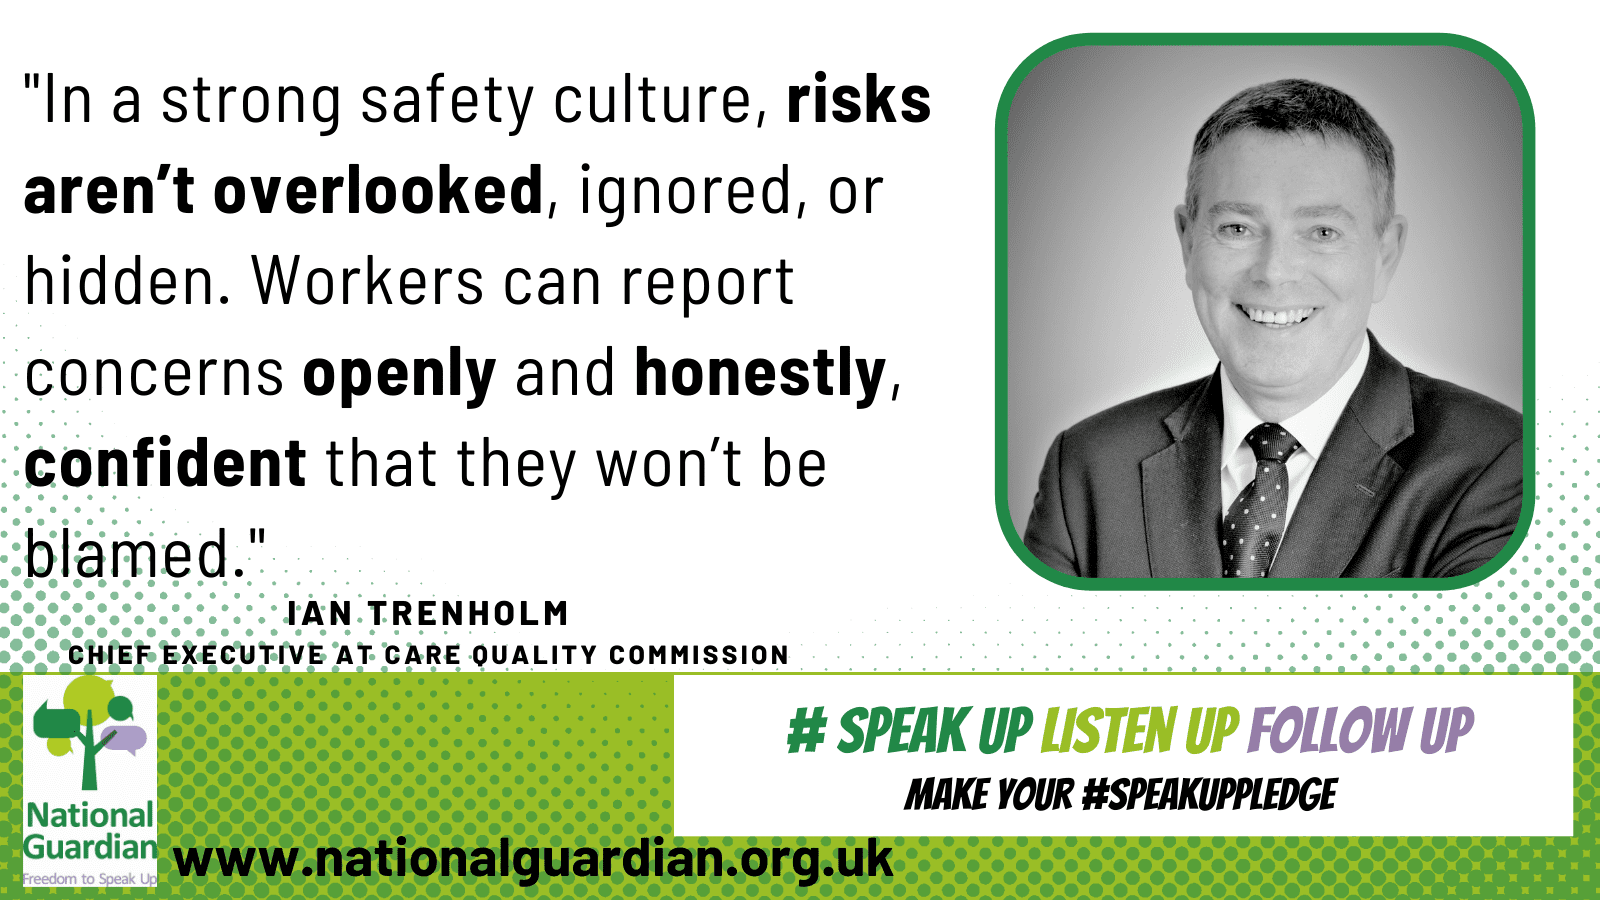 Imagine of Ian Trenholm and a quote from the blog "In a strong safety culture, risks aren’t overlooked, ignored, or hidden. Workers can report concerns openly and honestly, confident that they won’t be blamed."